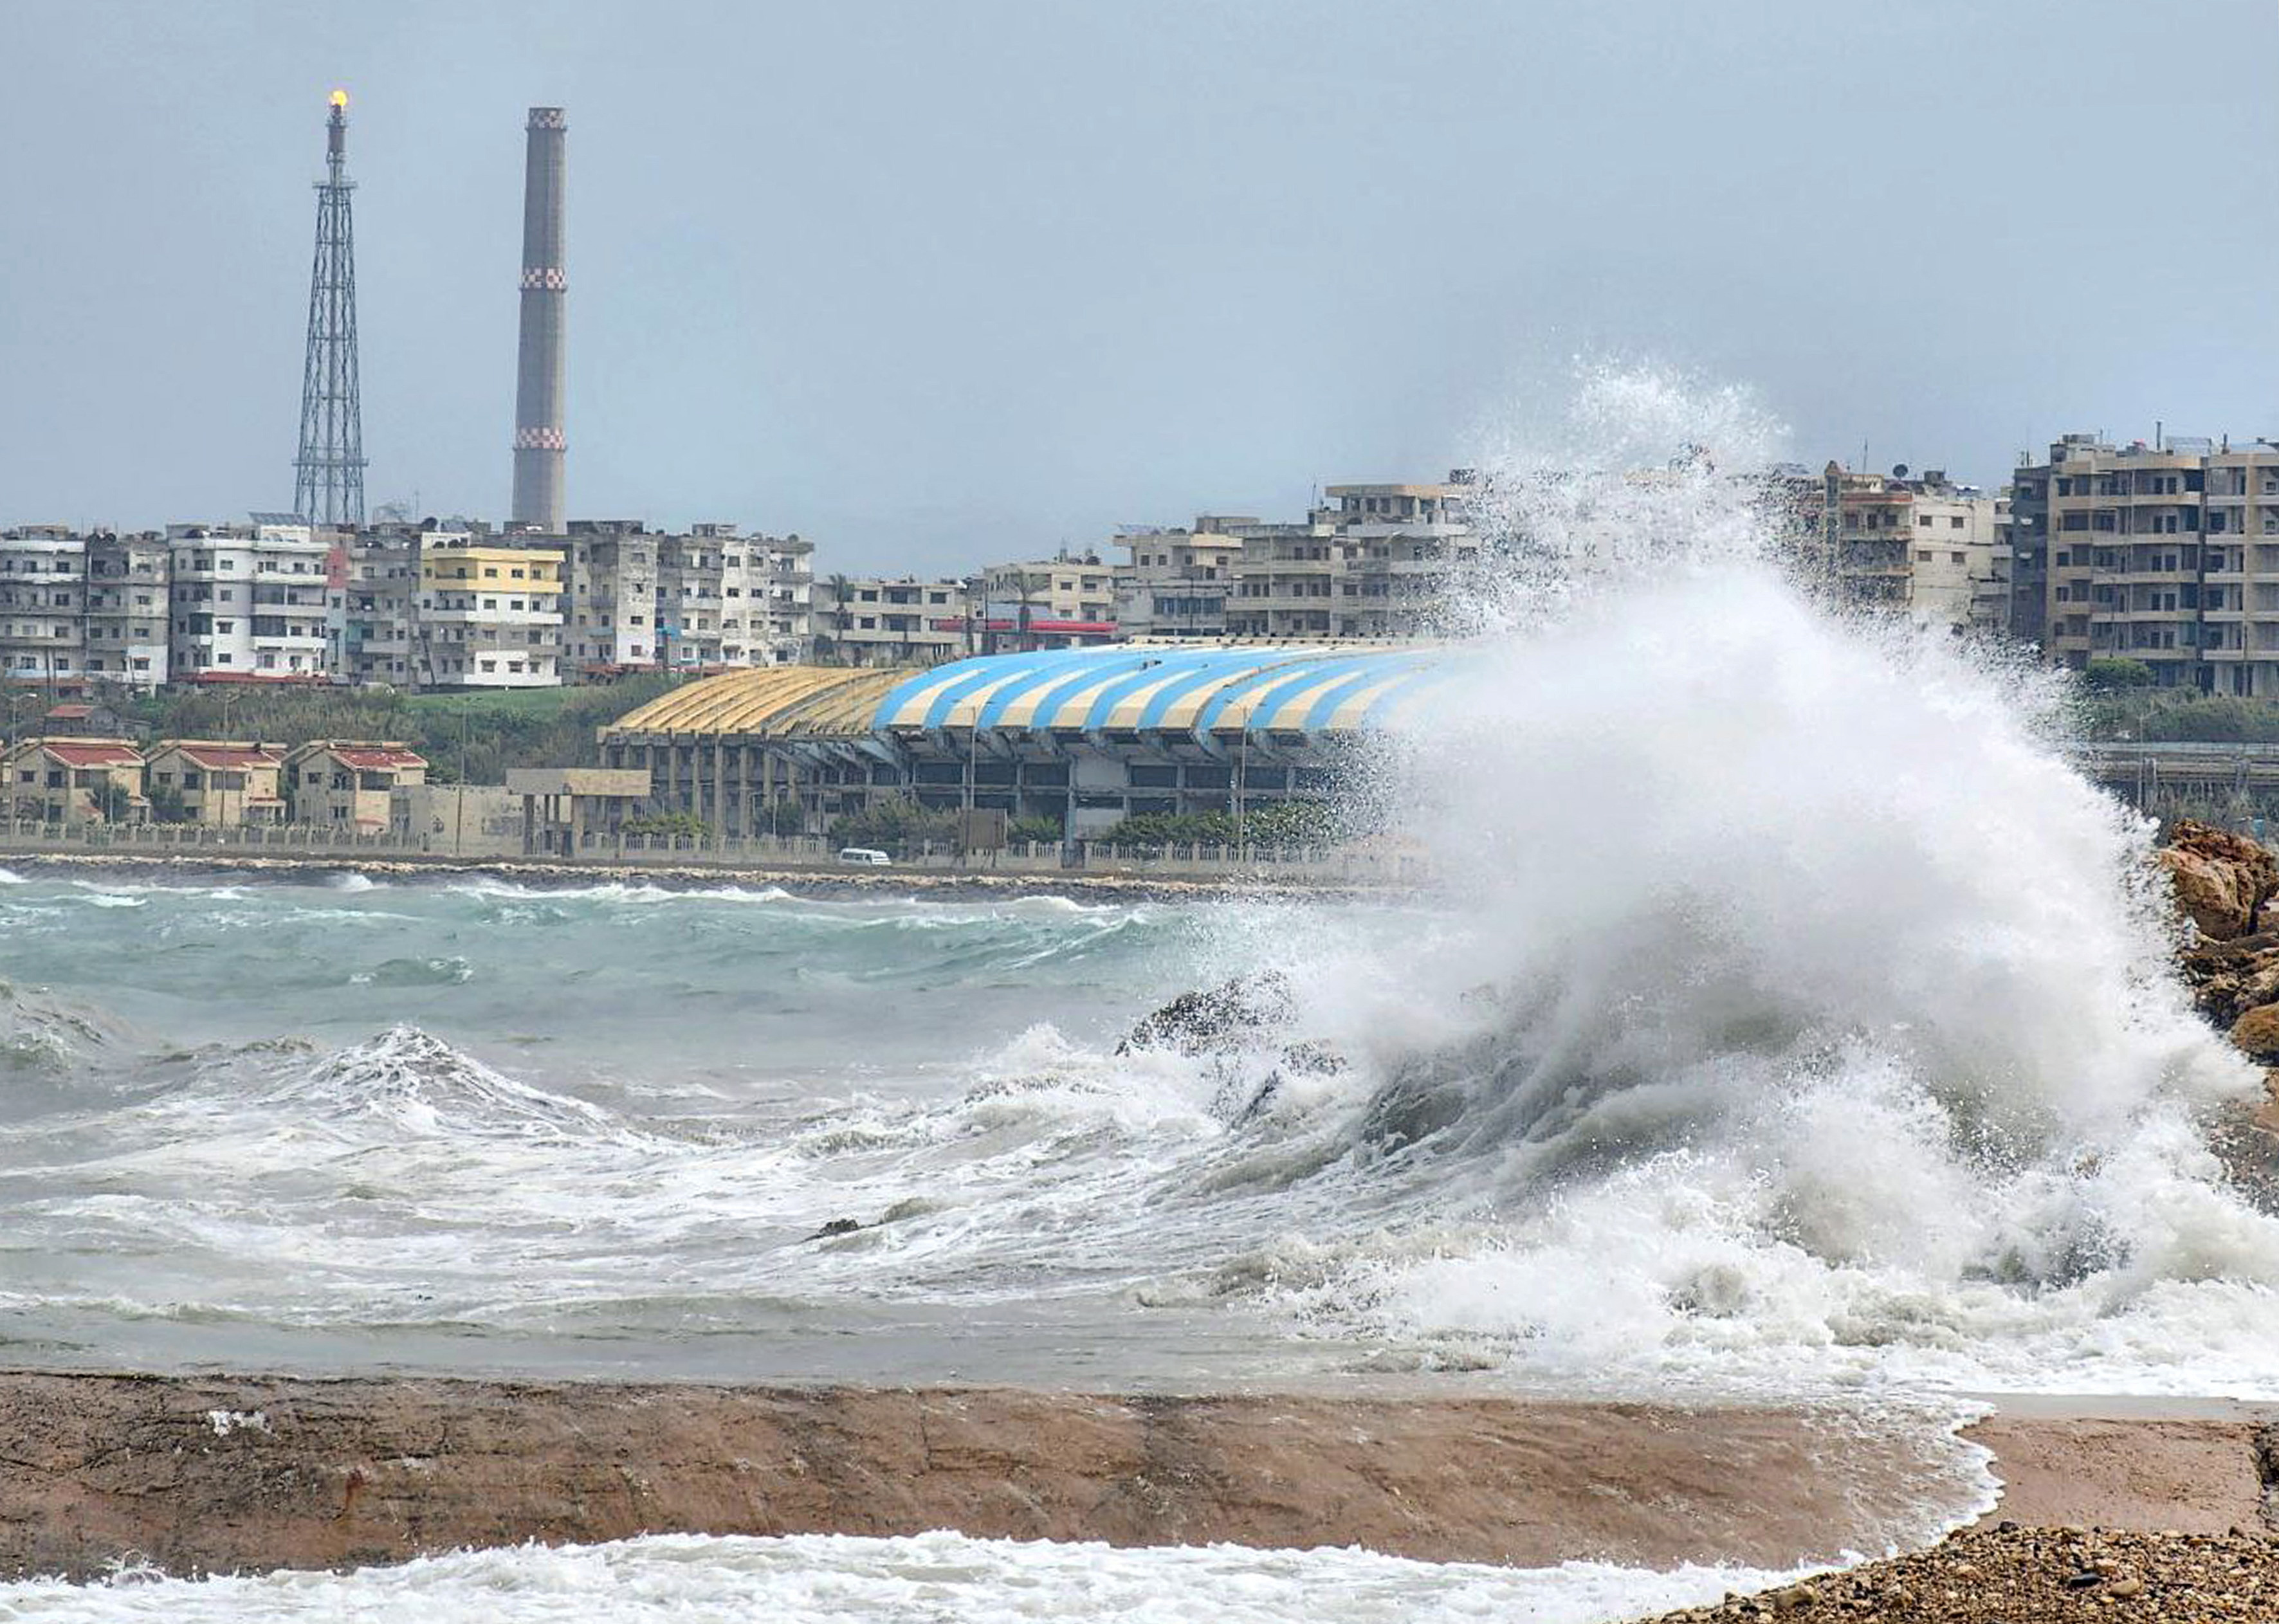 Waves crash during high winds in the Syrian port city of Banias